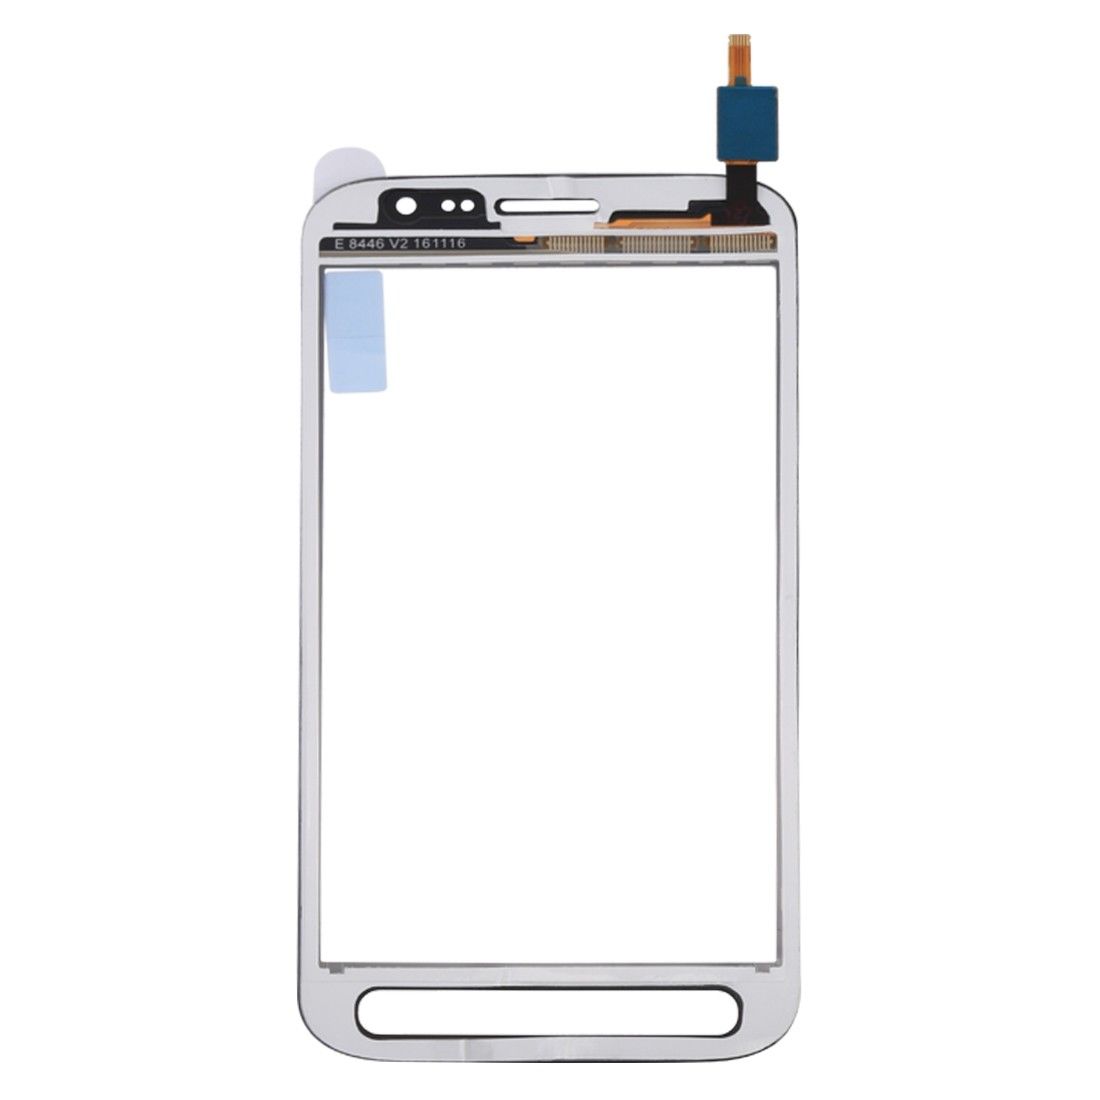 Samsung Galaxy Xcover 4 Front Touch Screen Digitizer - Black for [product_price] - First Help Tech